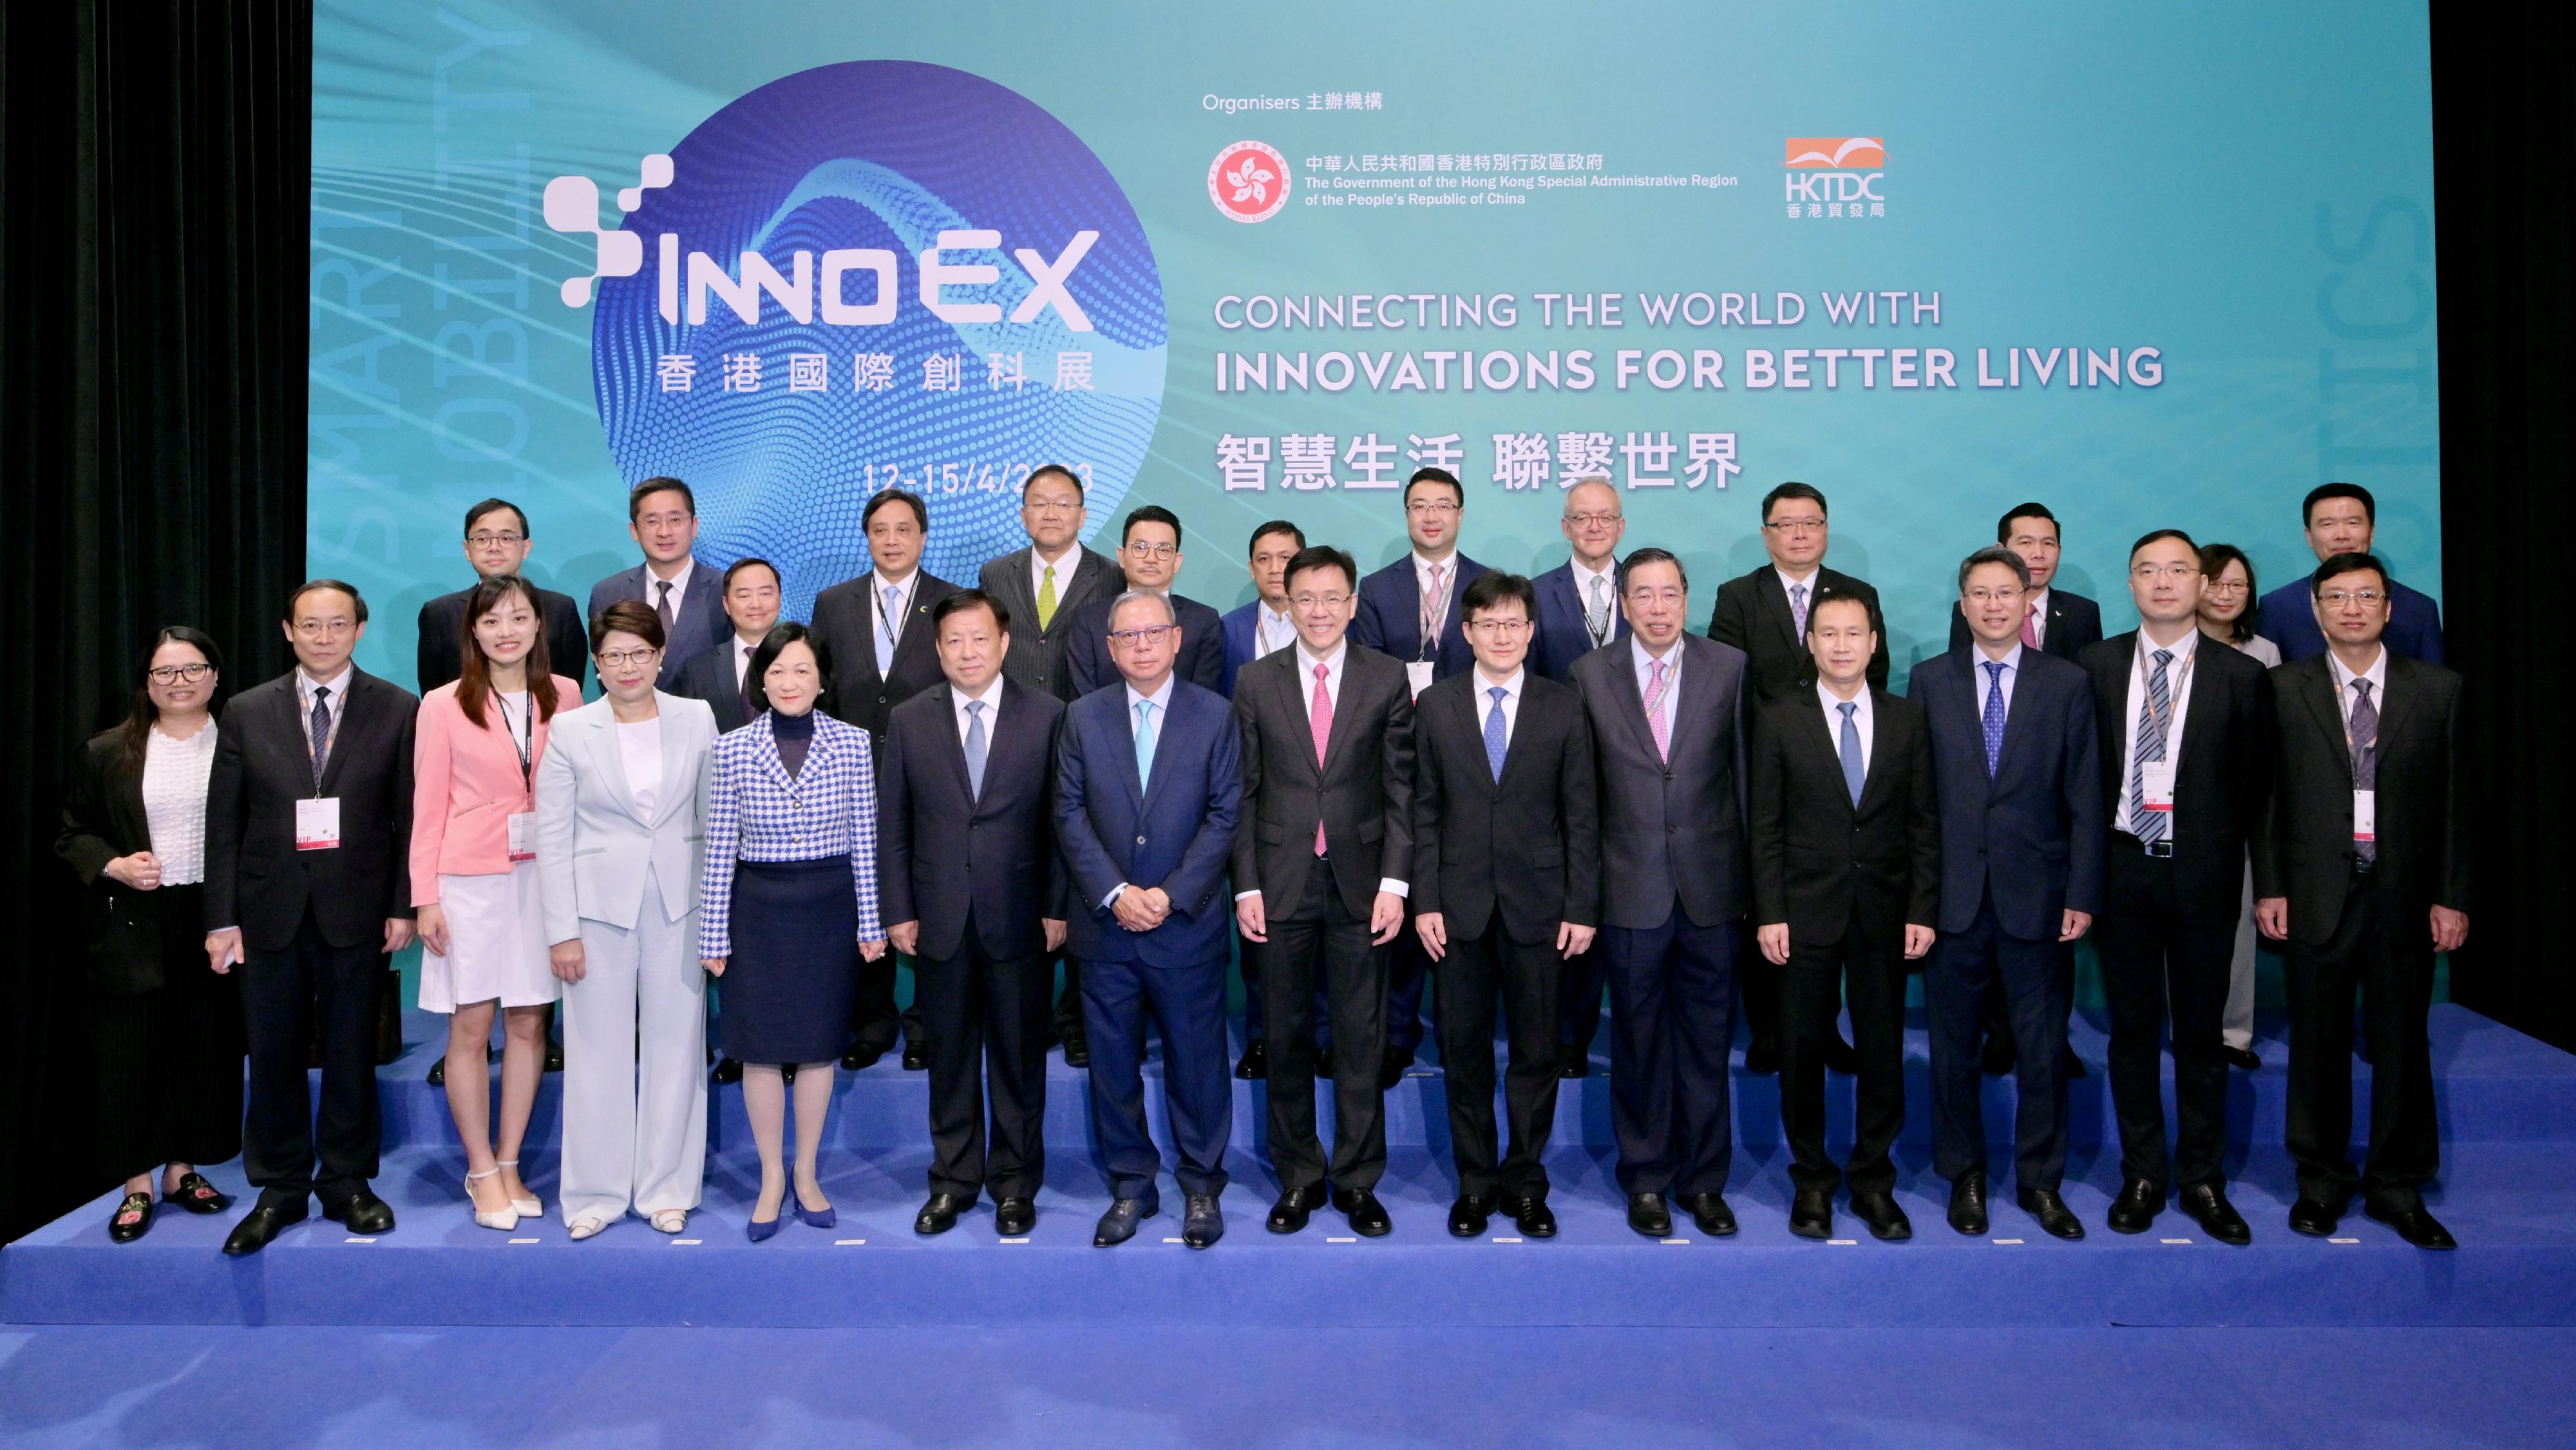 The Secretary for Innovation, Technology and Industry, Professor Sun Dong, attended the opening ceremony of the inaugural InnoEx today (April 12). Photo shows Professor Sun (front row, seventh right); Vice Governor of Jiangsu Provincial People's Government Mr Fang Wei (front row, sixth left); the Chairman of the Hong Kong Trade Development Council, Dr Peter Lam (front row, seventh left); the Director-General of the Department of Educational, Scientific and Technological Affairs of the Liaison Office of the Central People's Government in the Hong Kong Special Administrative Region, Dr Wang Weiming (front row, sixth right); the President of the Legislative Council, Mr Andrew Leung (front row, fifth right); the Convenor of the Non-official Members of the Executive Council, Mrs Regina Ip (front row, fifth left); the Permanent Secretary for Innovation, Technology and Industry, Mr Eddie Mak (front row, third right); the Under Secretary for Commerce and Economic Development, Dr Bernard Chan (back row, second left); the Under Secretary for Innovation, Technology and Industry, Ms Lillian Cheong (front row, third left); the Commissioner for Innovation and Technology, Ms Rebecca Pun (back row, second right); the Acting Government Chief Information Officer, Mr Tony Wong (back row, third left), and other guests.